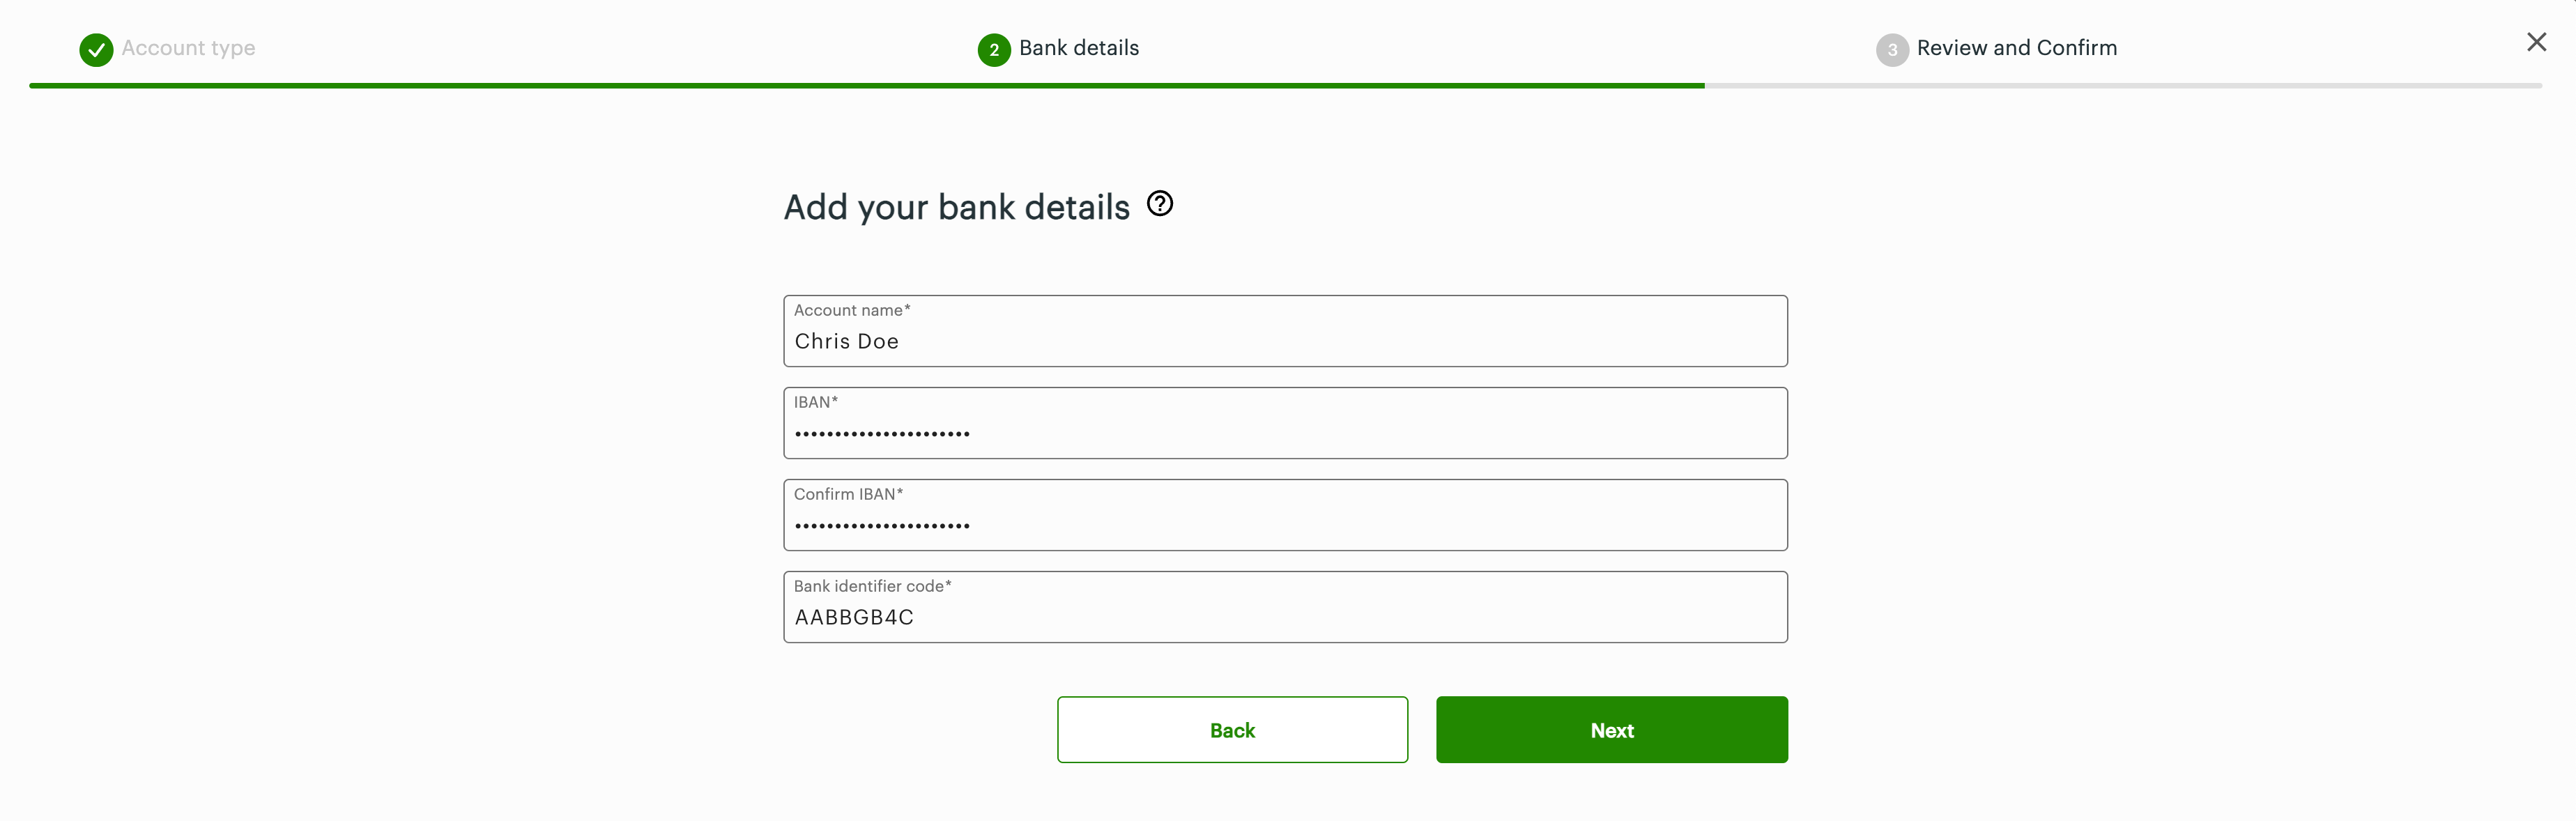 Add your bank details: IBAN